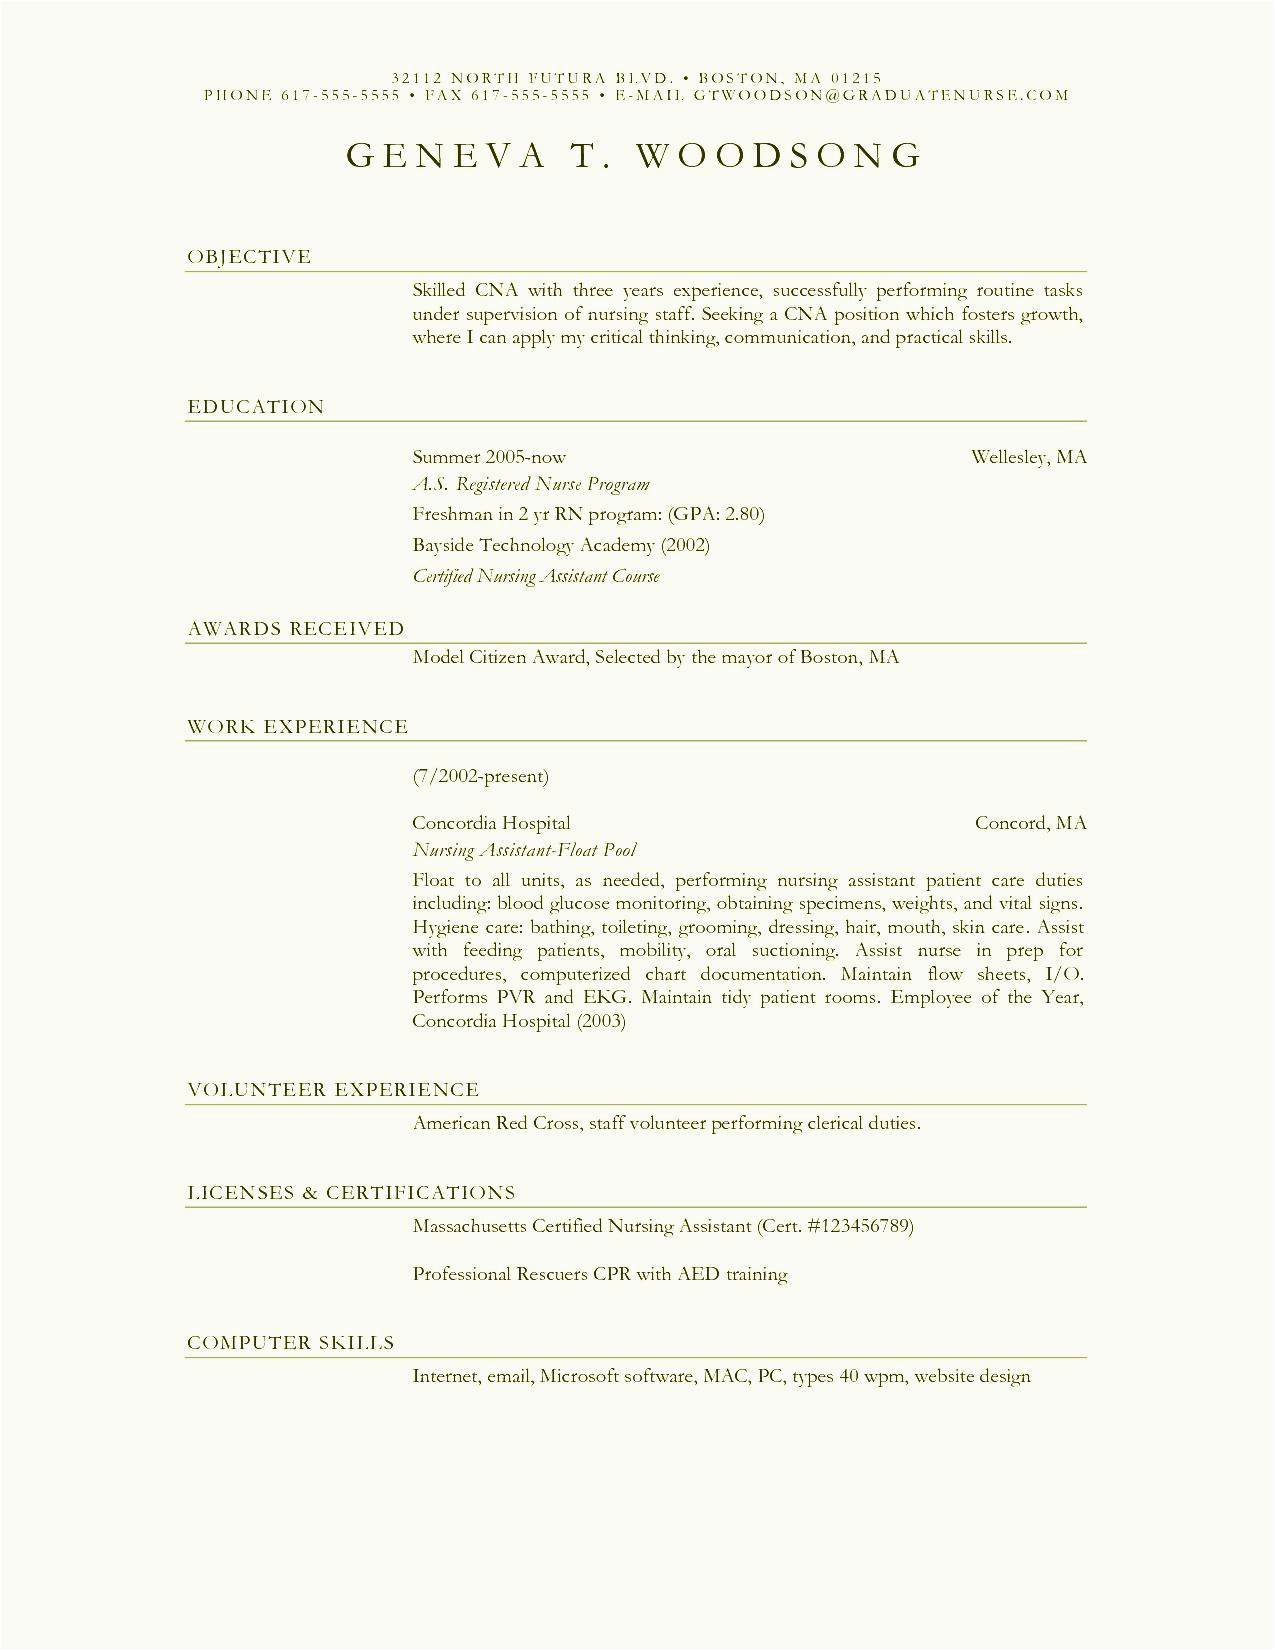 Sample Resume Objectives for Nursing Aide 12 13 Resume Examples for Nurses assistant